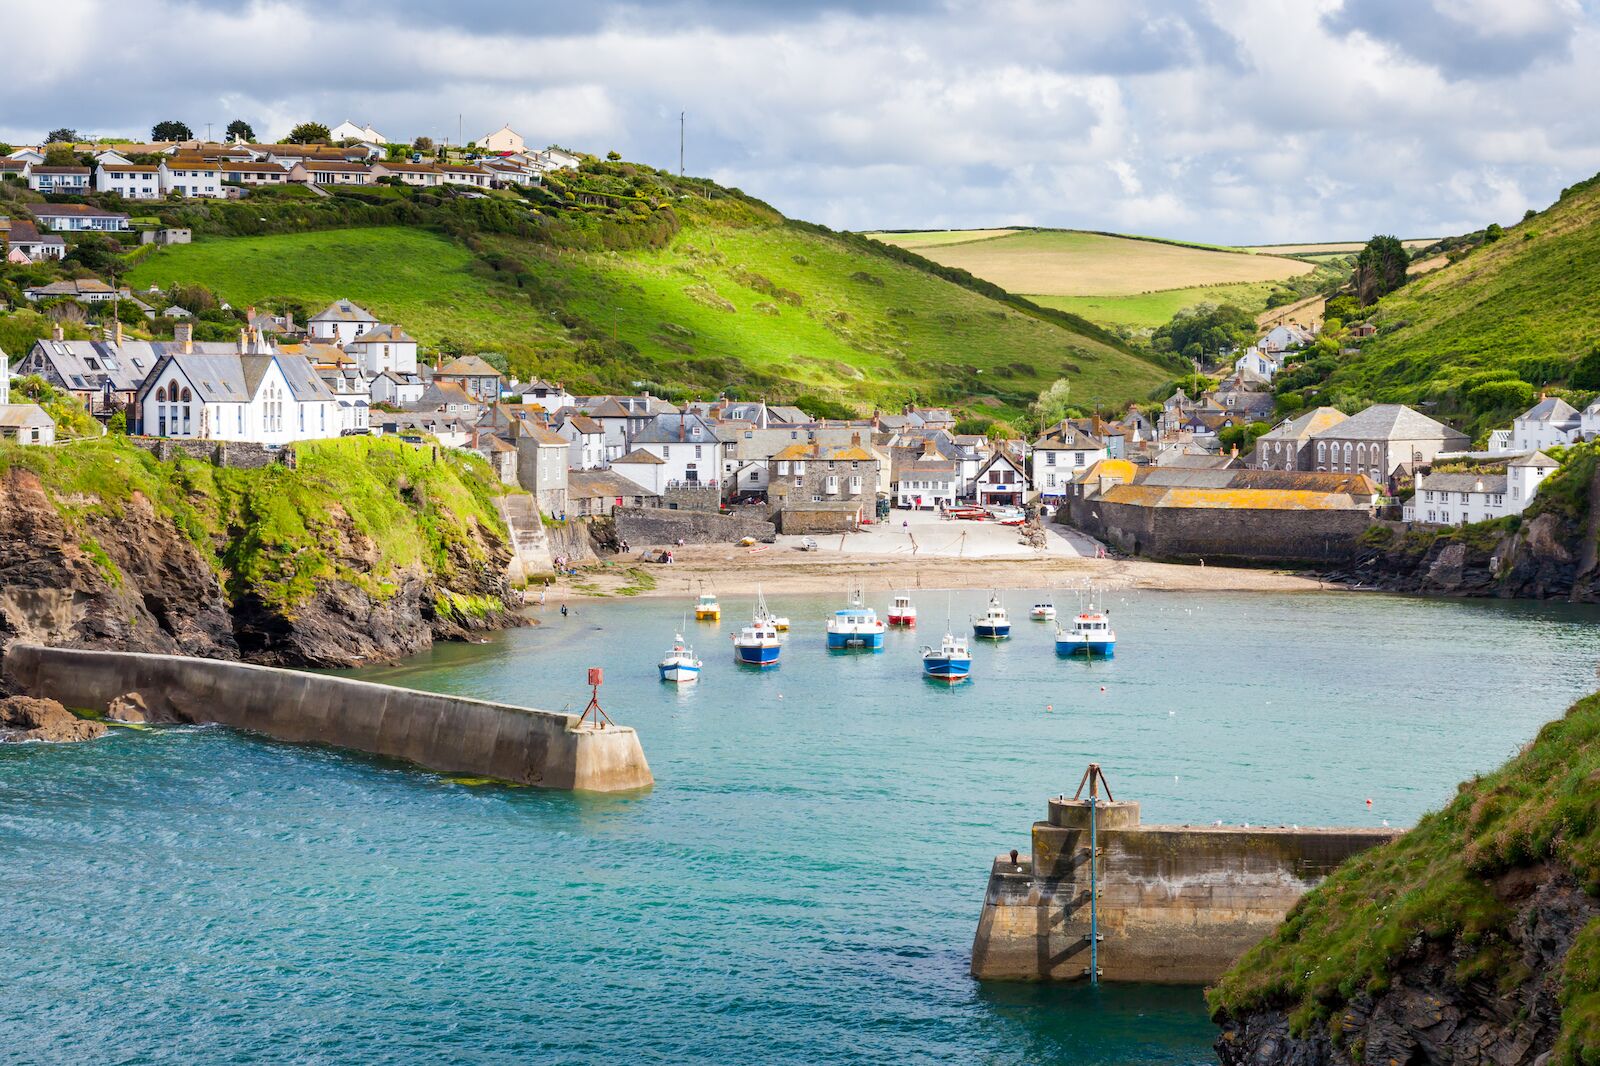 The fishing village of Port Isaac in Cornwall.